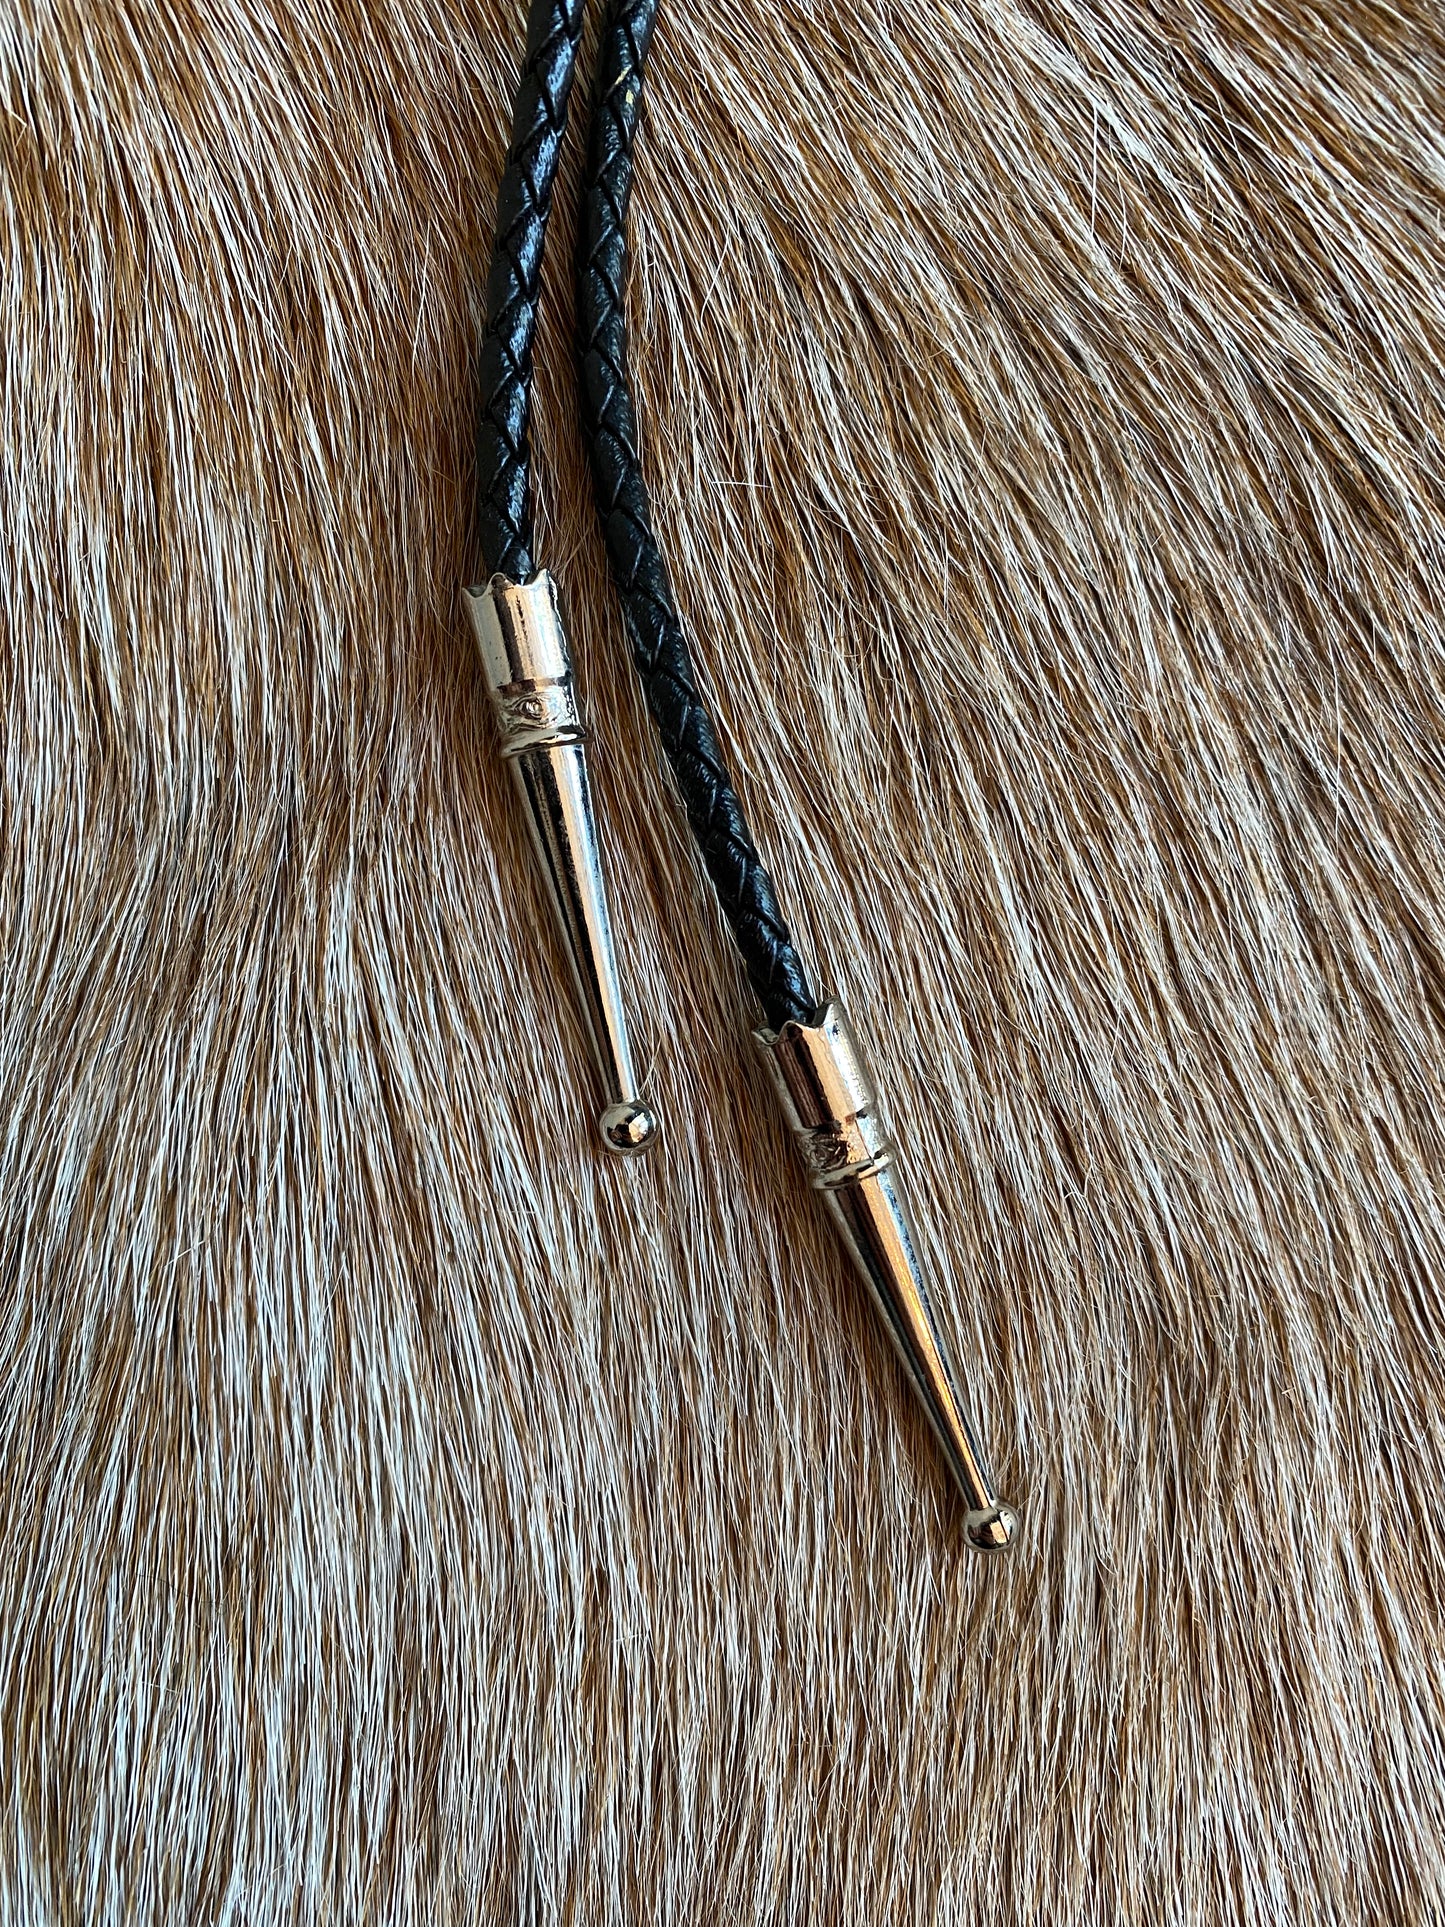 Intricate Wrapped Snake Pendant Bolo Tie